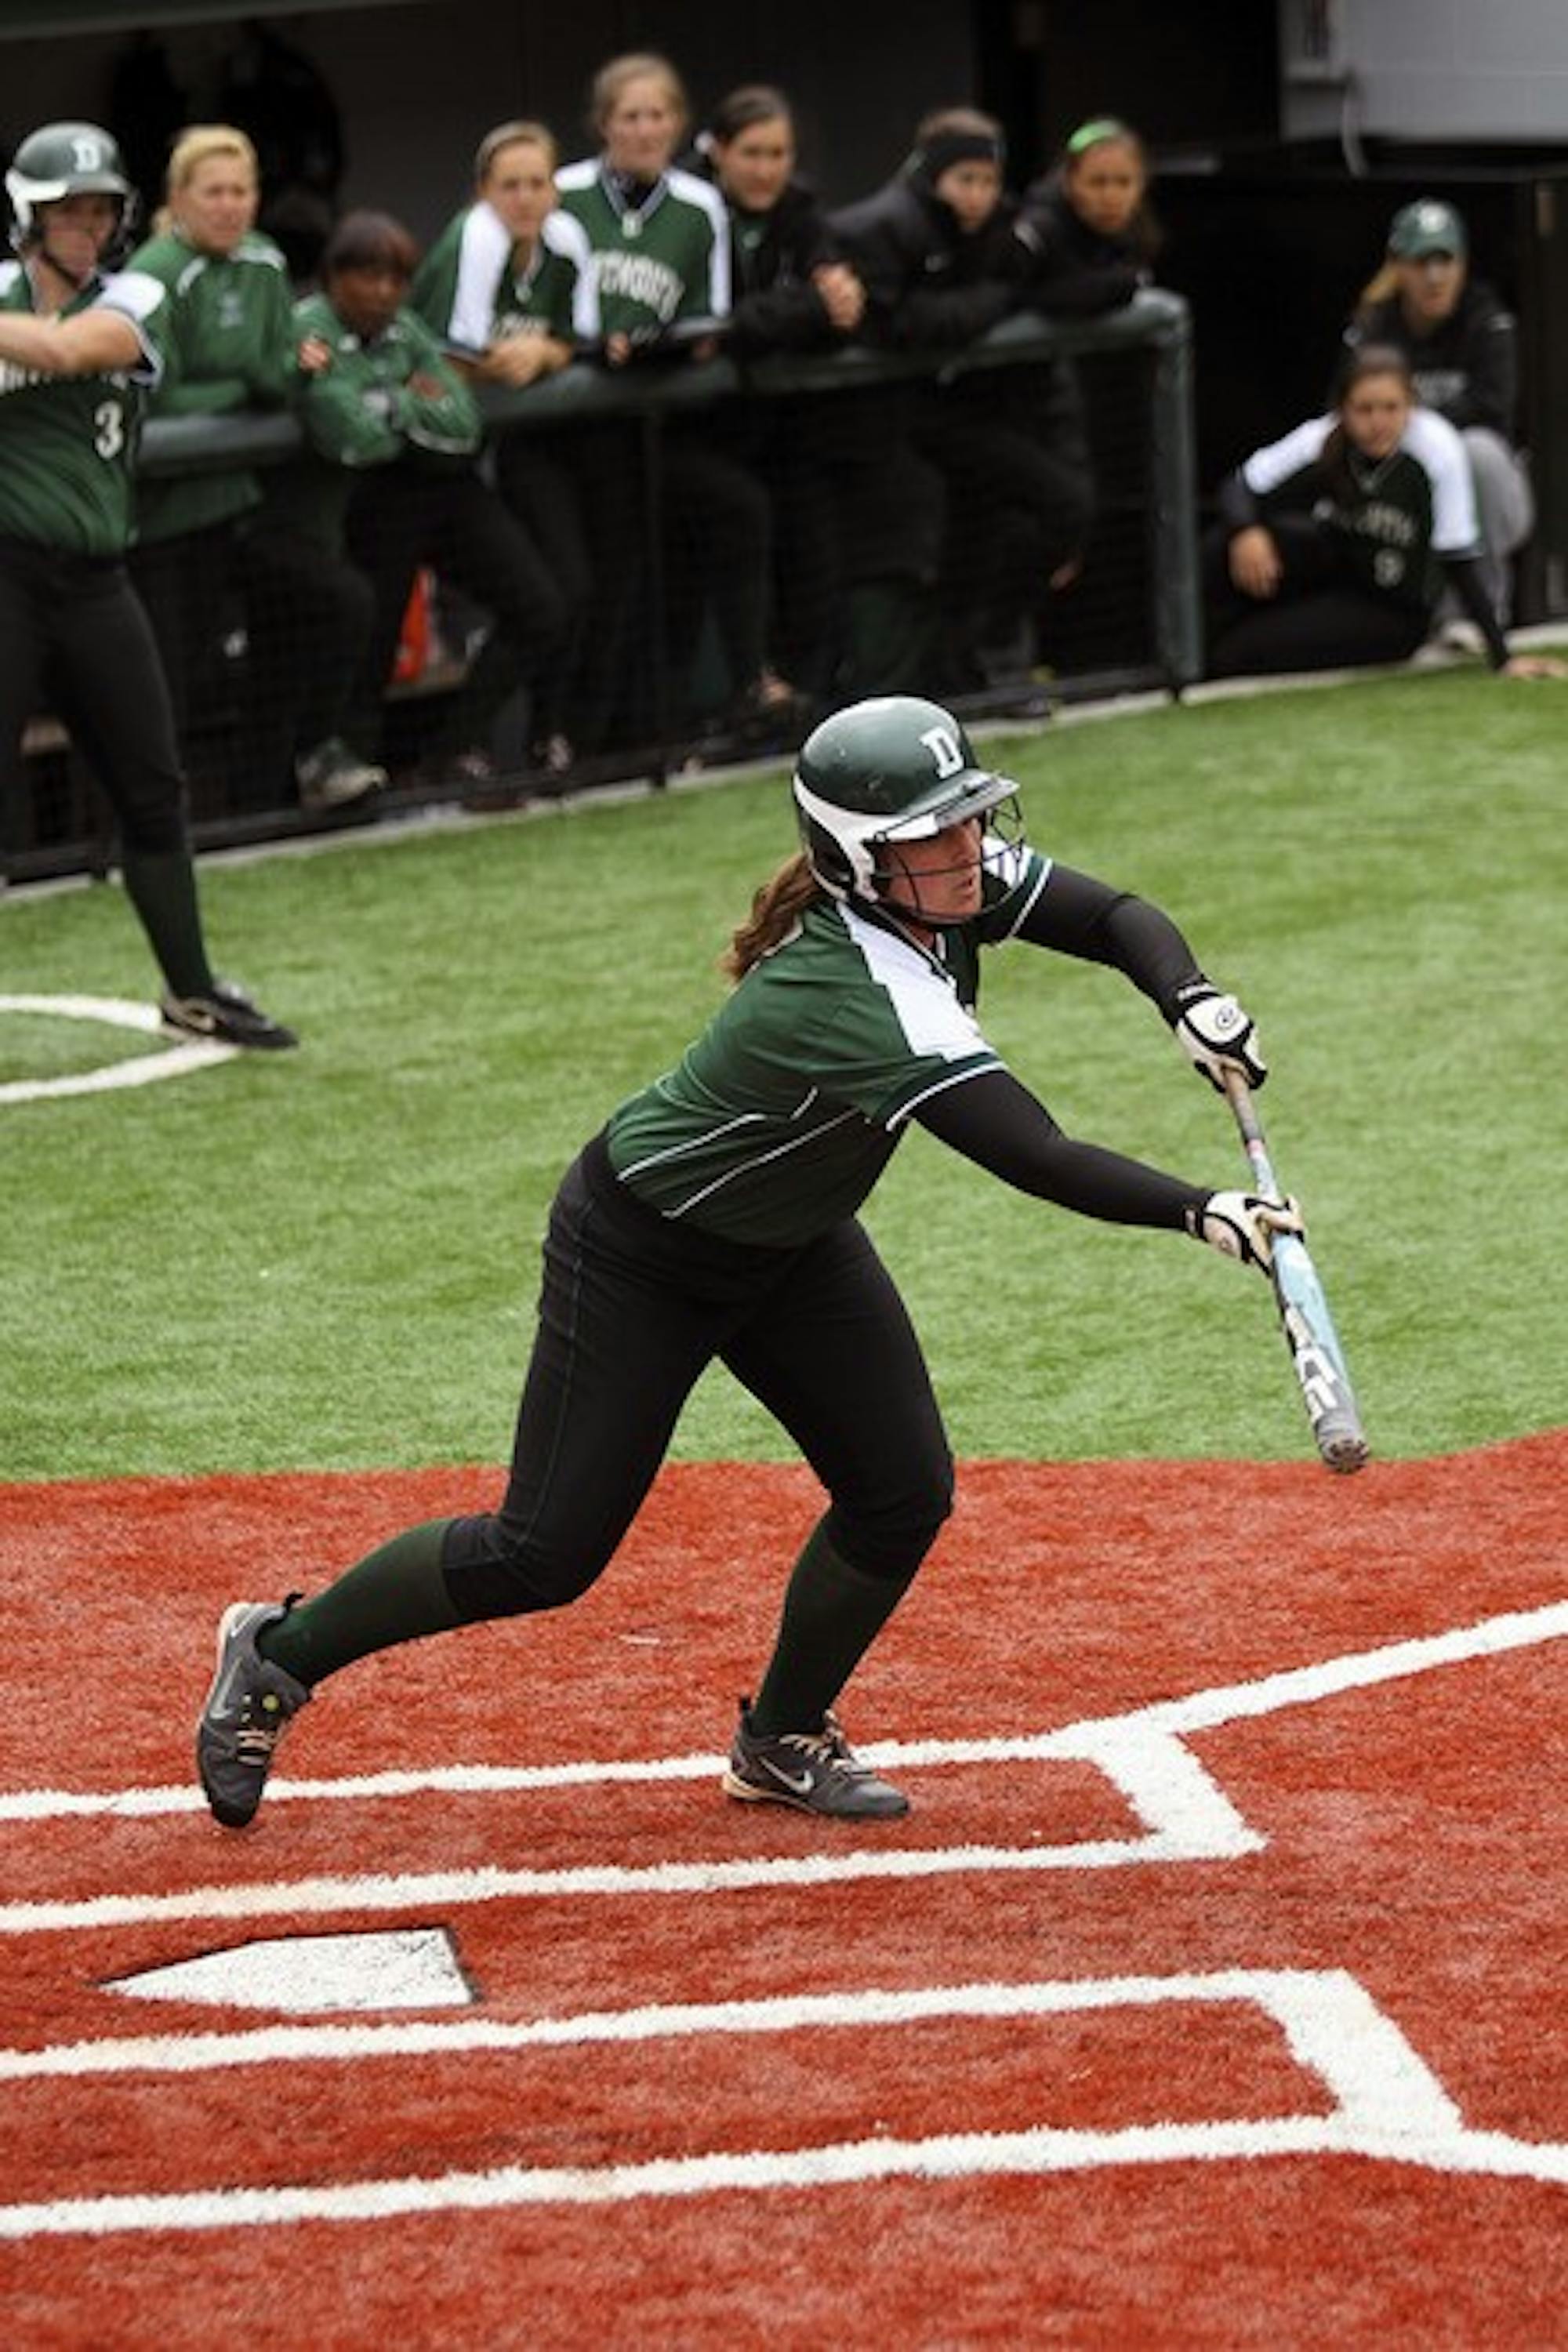 Although the Dartmouth softball team sits in second place in the Ivy League's North Division, Harvard has already clinched the division with a 15-1 record.